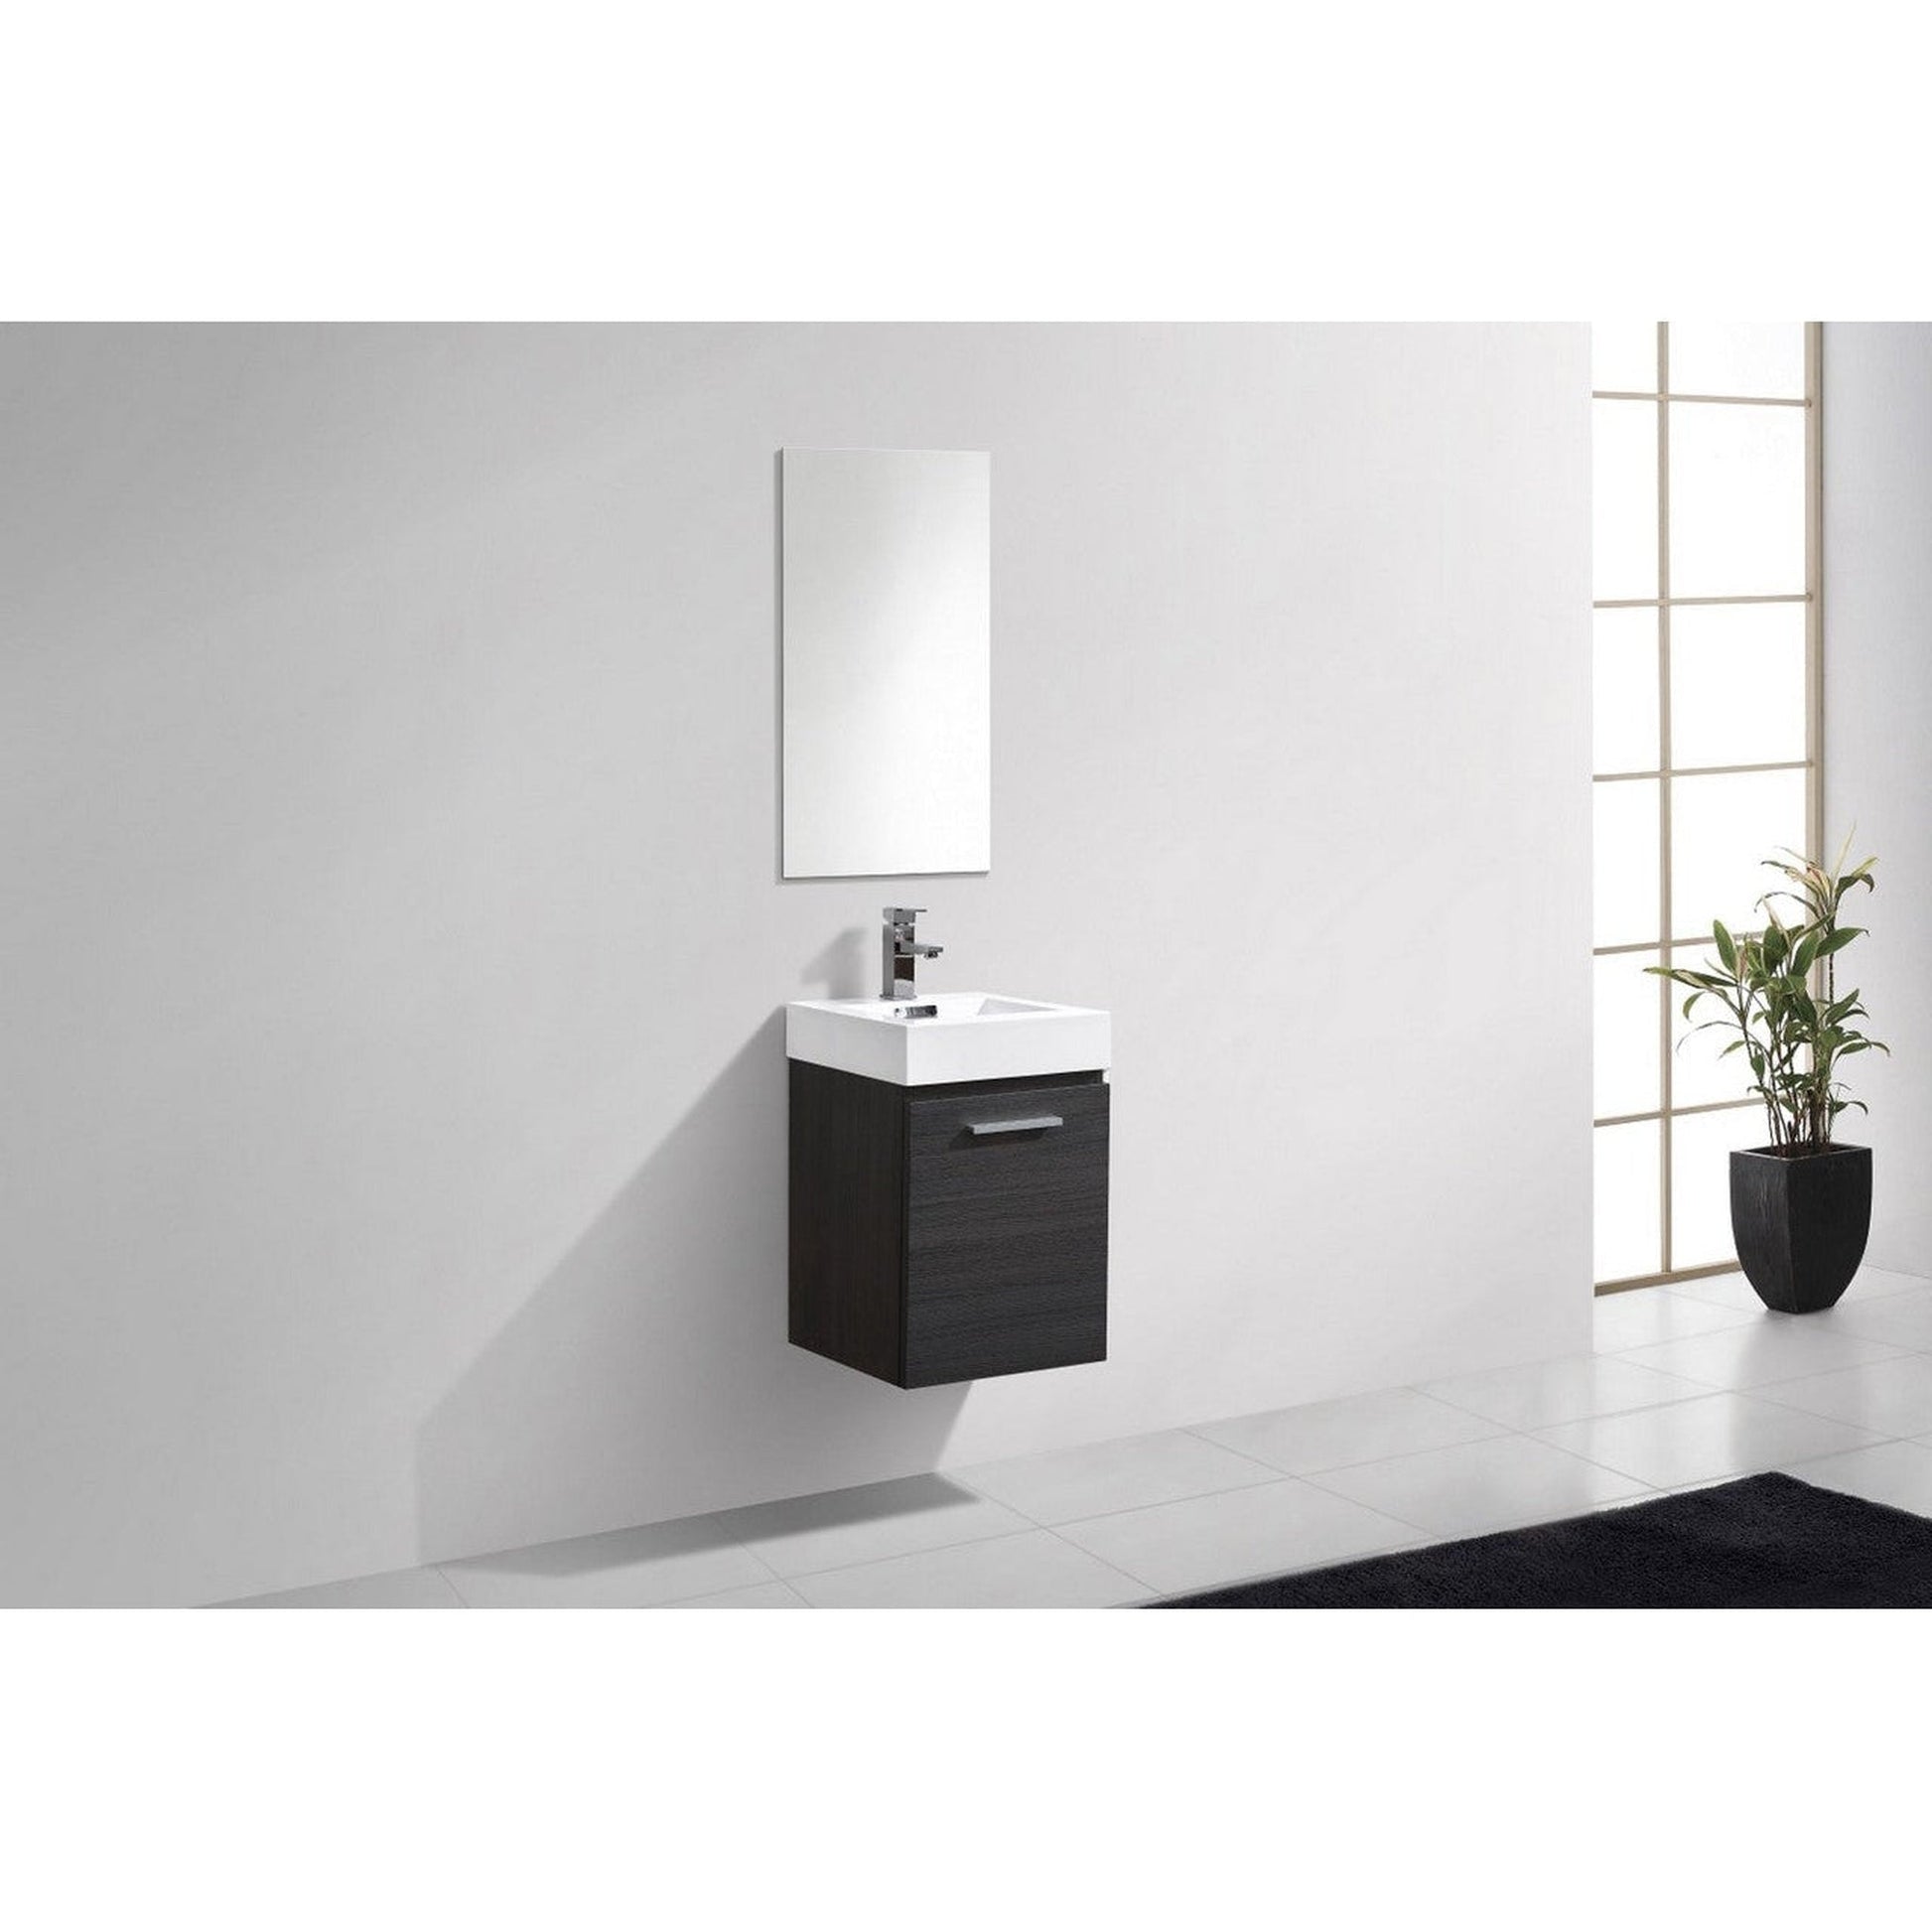 KubeBath Bliss 16" High Gloss Gray Oak Wall-Mounted Modern Bathroom Vanity With Single Integrated Acrylic Sink With Overflow and 22" Wood Framed Mirror With Shelf